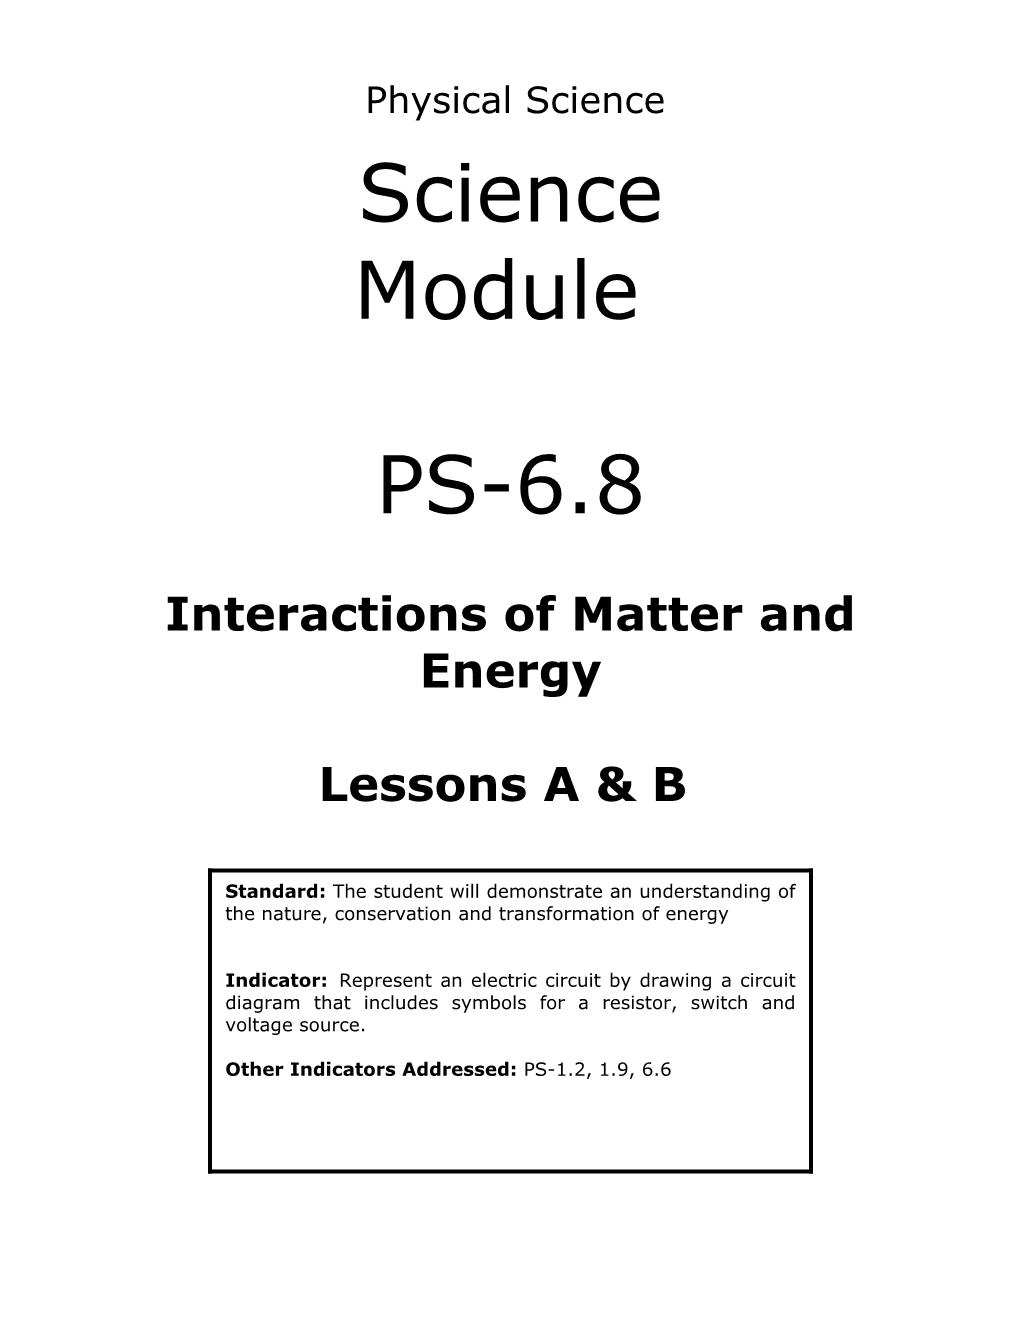 Interactions of Matter and Energy